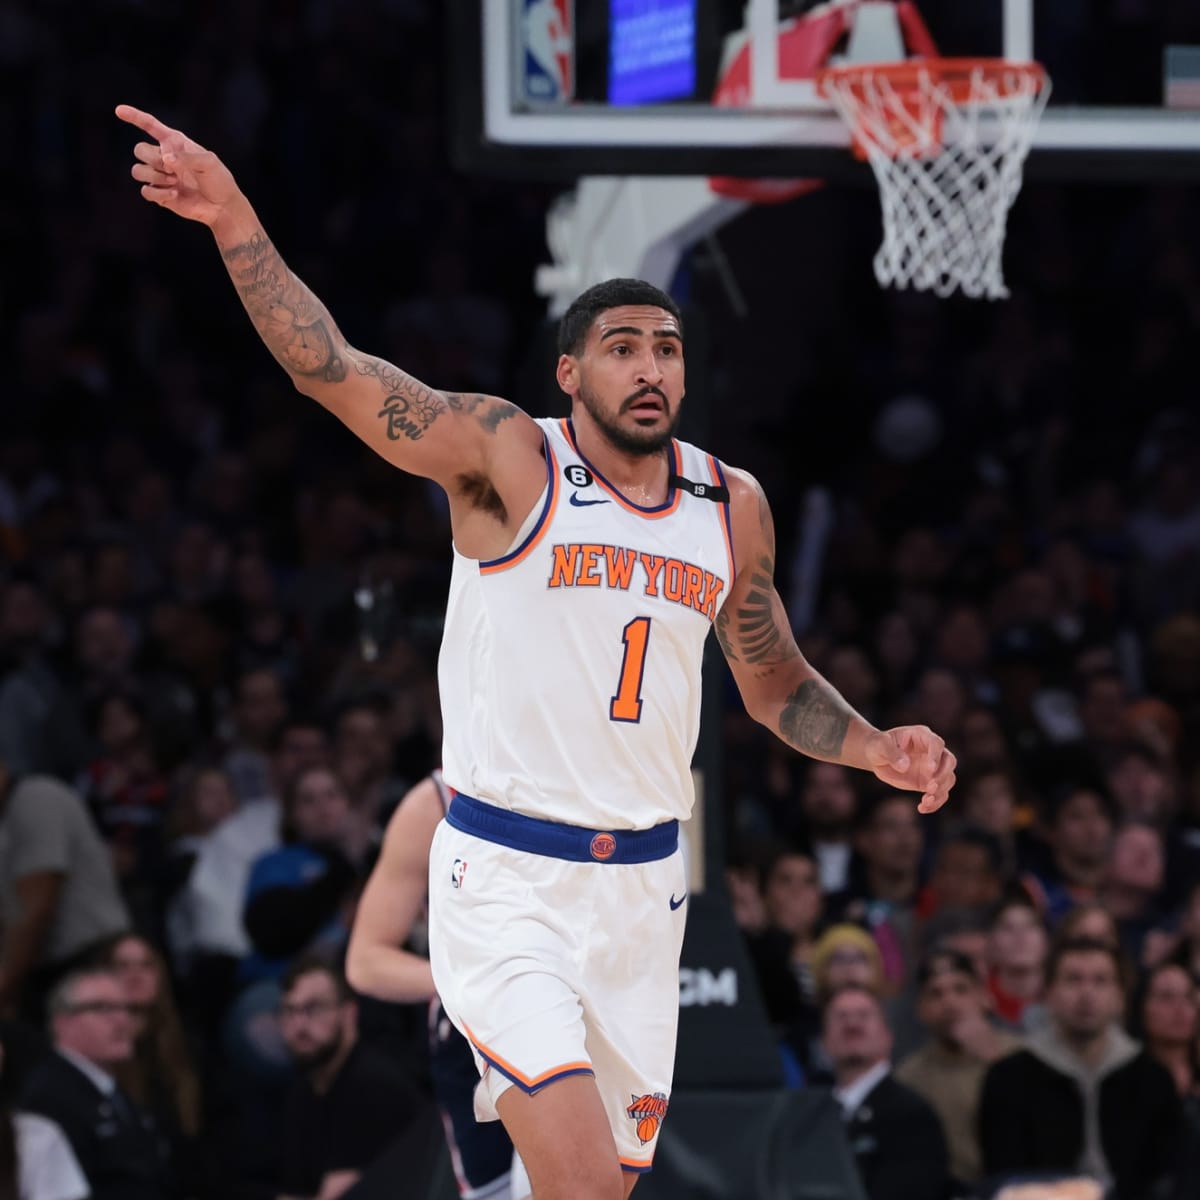 Obi Toppin's run with Knicks is over, so what's next for New York